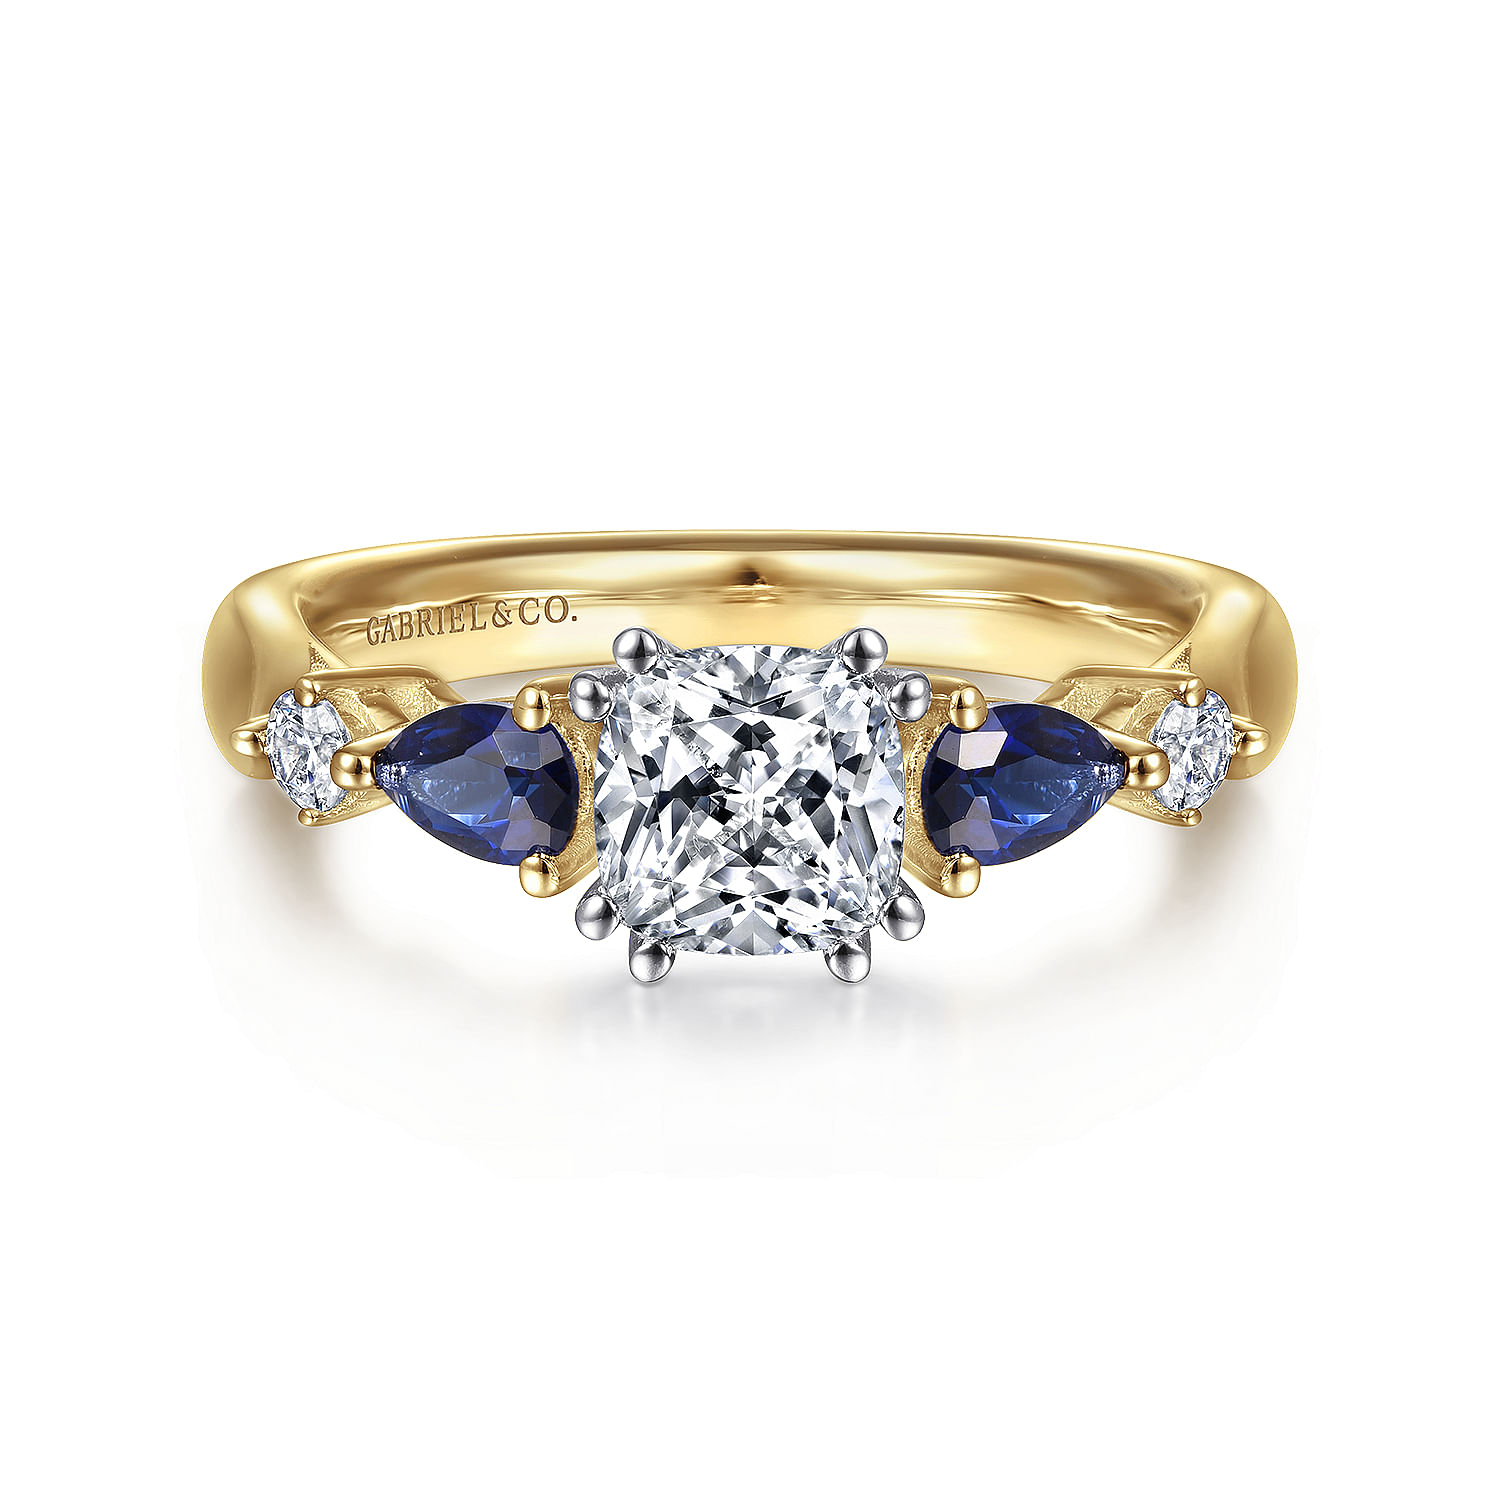 Carrie - 14K White-Yellow Gold Cushion Cut Five Stone Sapphire and Diamond Engagement Ring